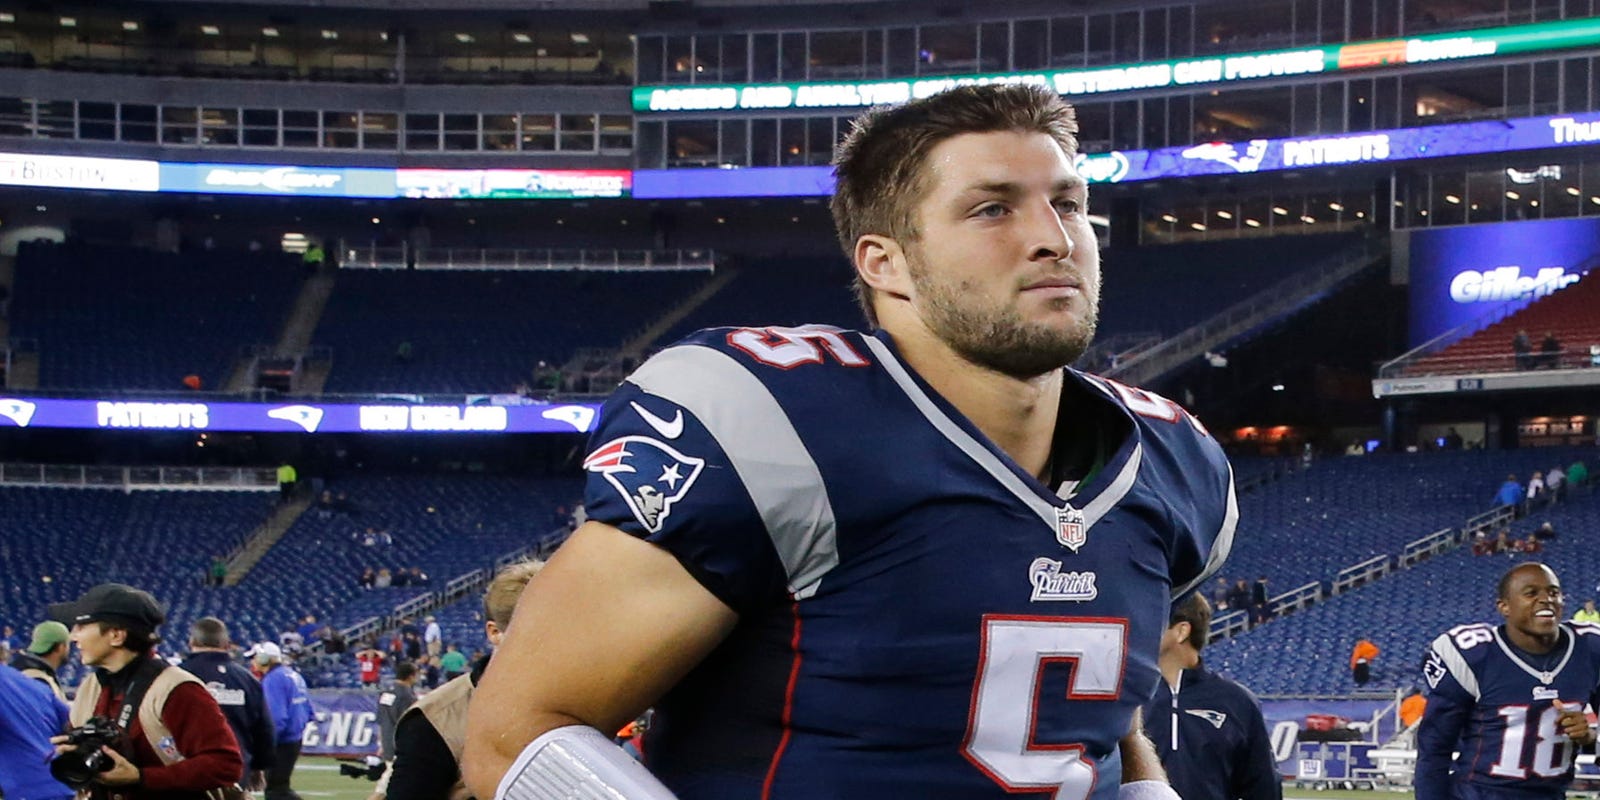 Eagles are Tim Tebow's best, last chance at NFL career